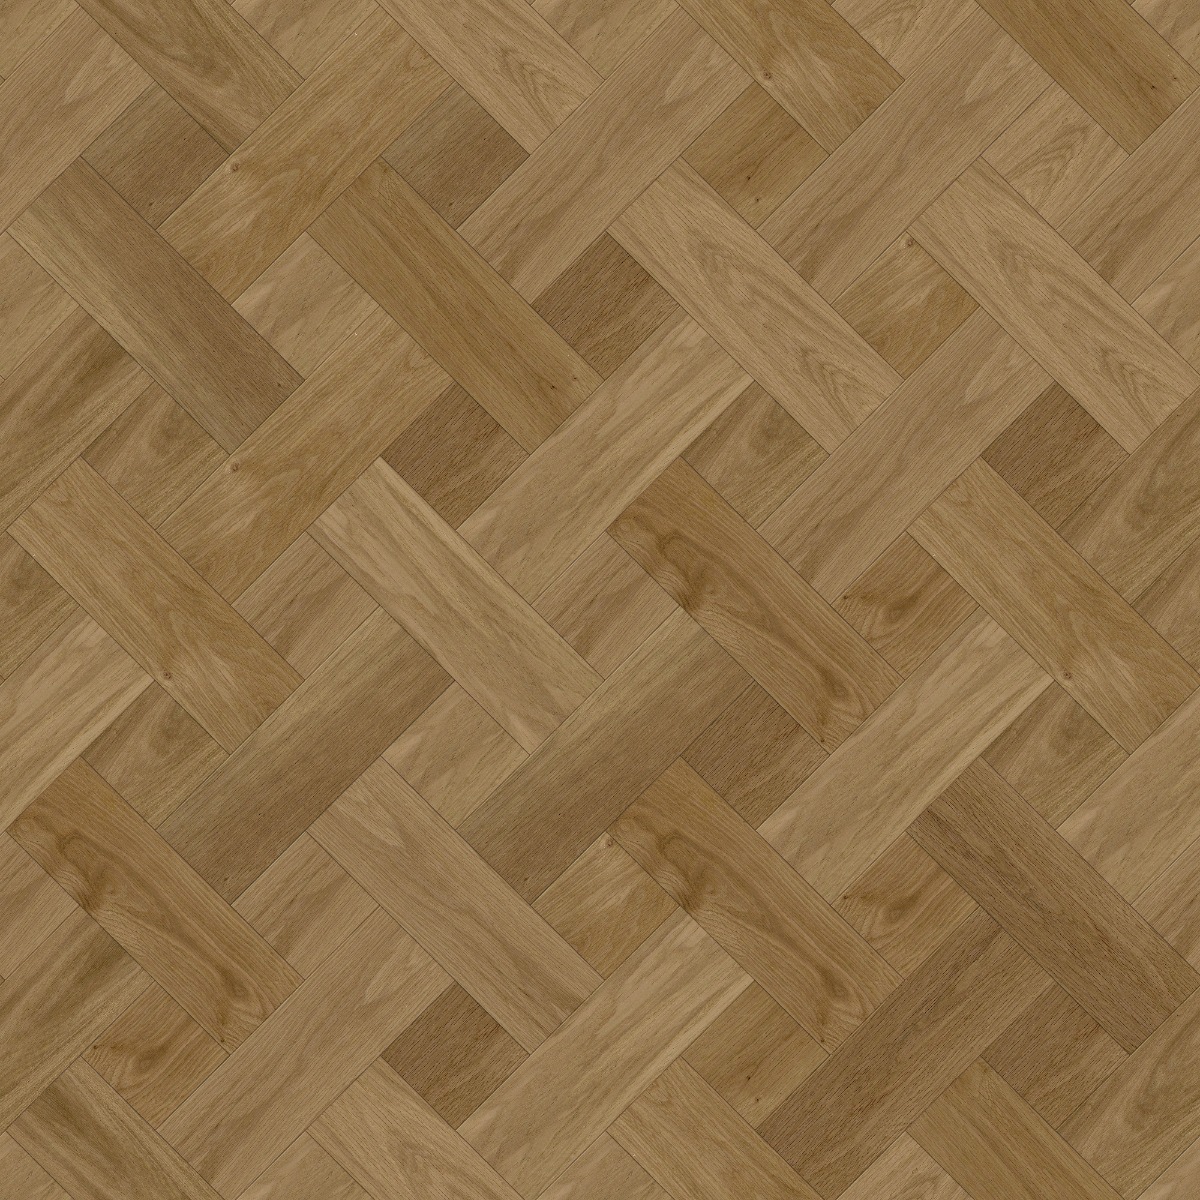 A seamless wood texture with expressive 152 boards arranged in a Lattice Weave pattern